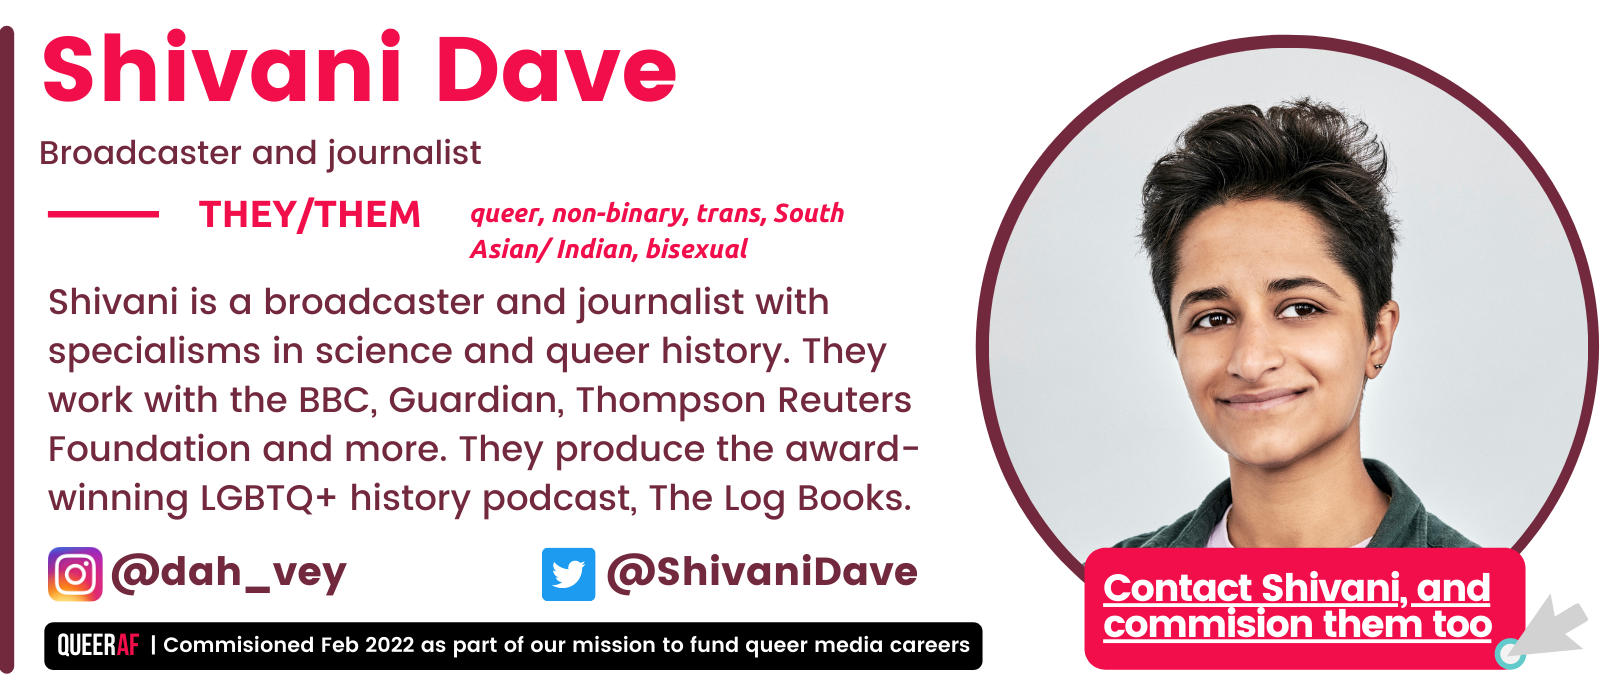 They/Them @dah_vey @ShivaniDave Contact Shivani, and commision them too Shivani is a broadcaster and journalist with specialisms in science and queer history. They work with the BBC, Guardian, Thompson Reuters Foundation and more. They produce the award-winning LGBTQ+ history podcast, The Log Books. queer, non-binary, trans, South Asian/ Indian, bisexual Shivani Dave Broadcaster and journalist